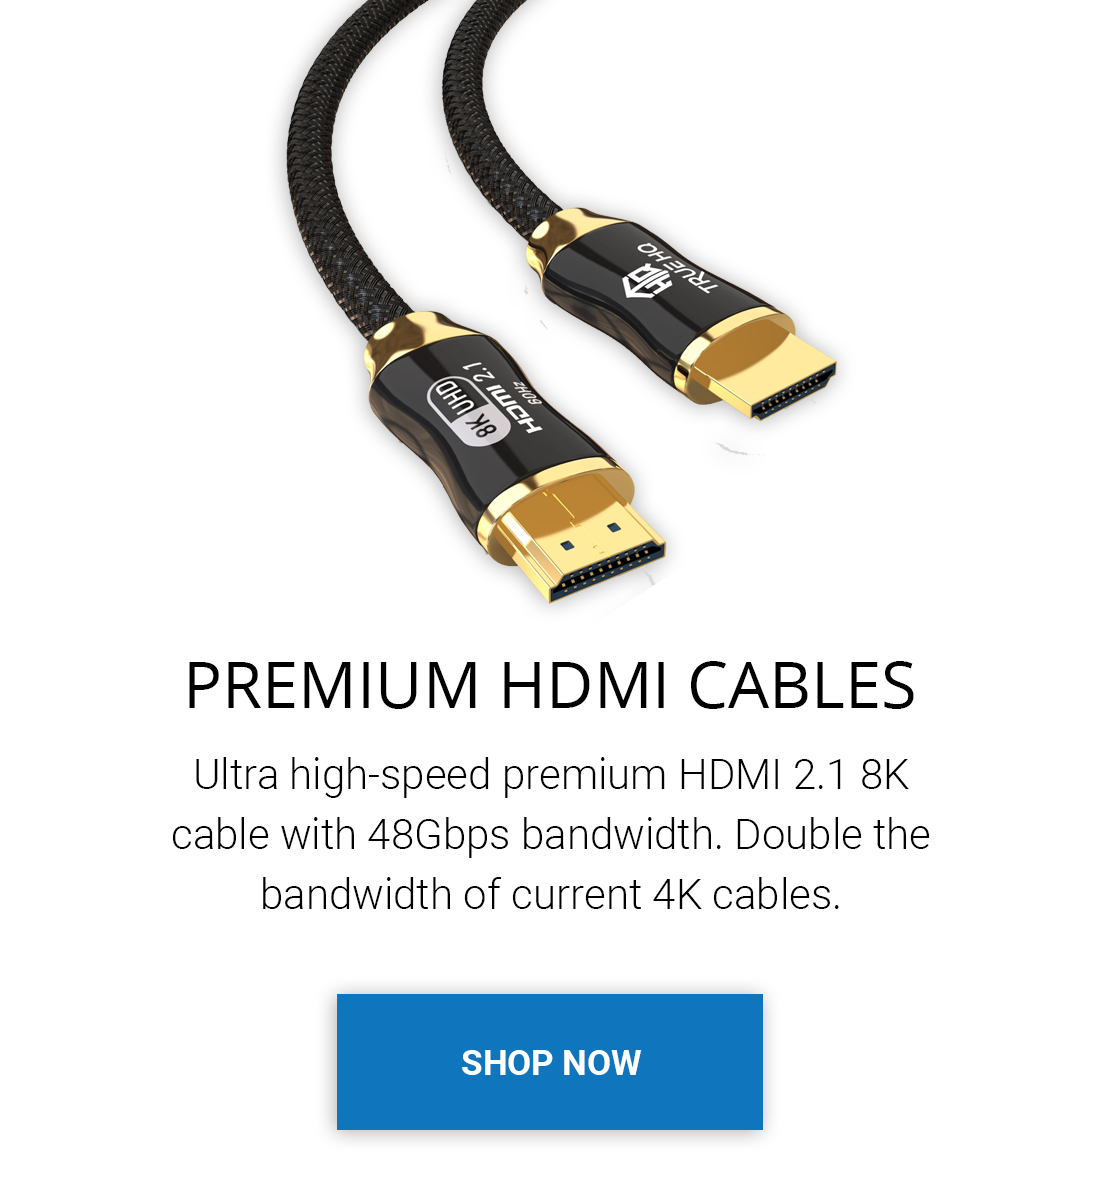 Cable hdmi 6m - Cdiscount